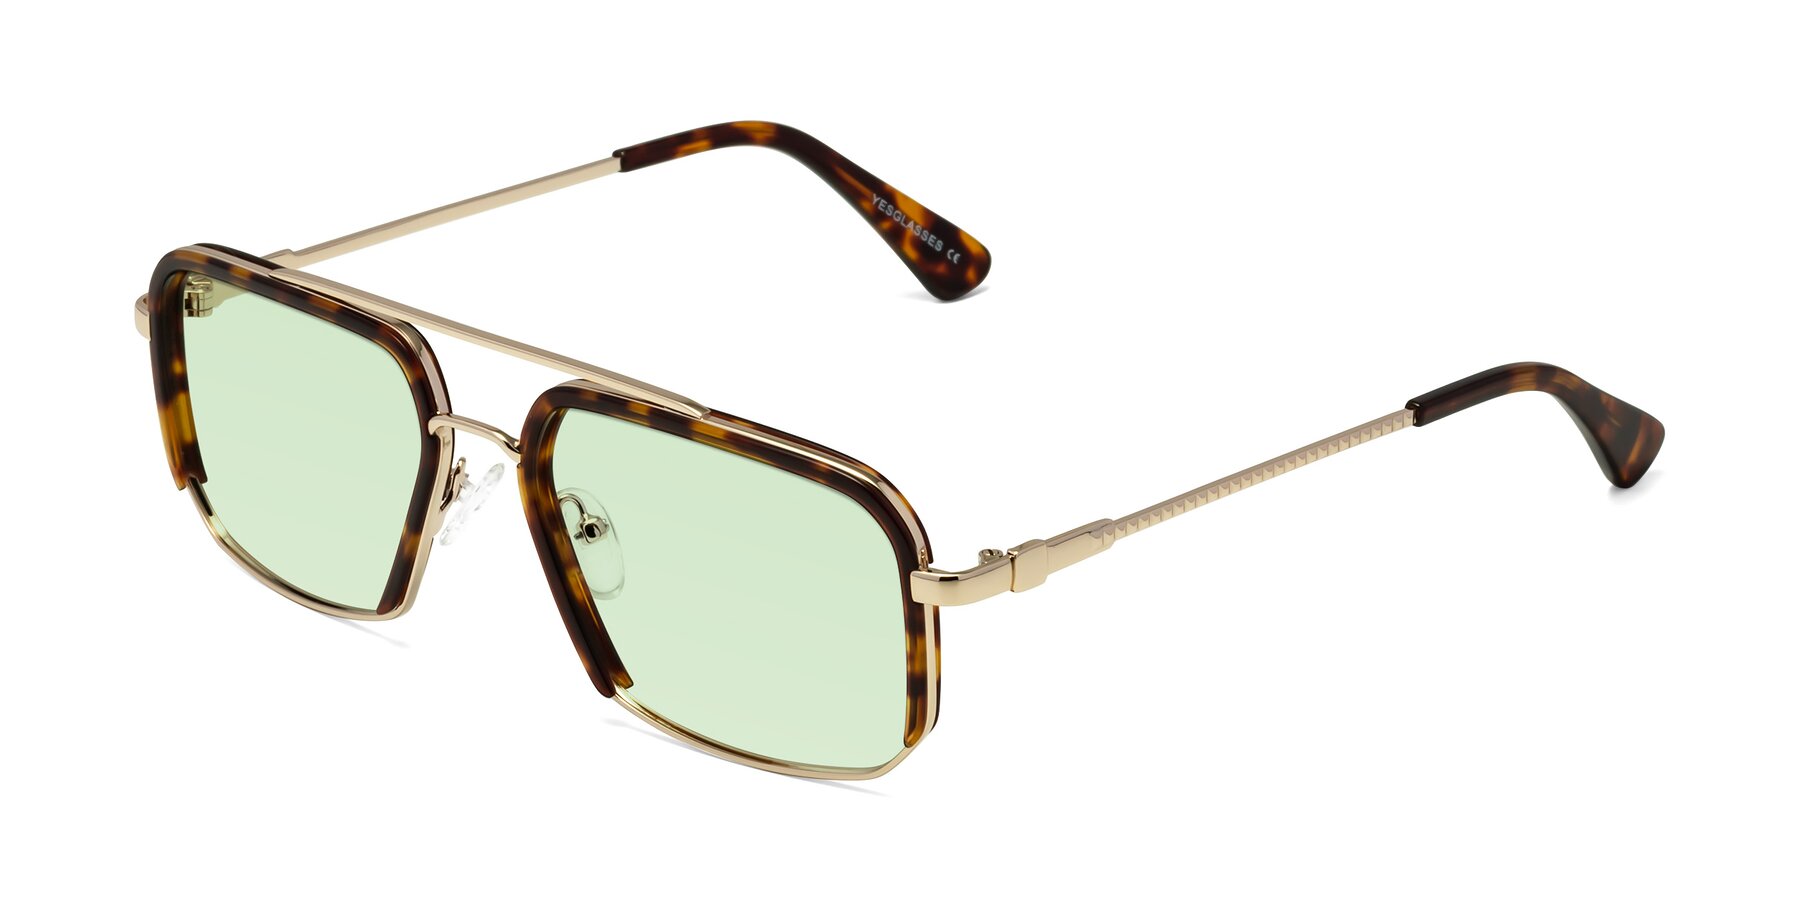 Angle of Dechter in Tortoise-Gold with Light Green Tinted Lenses